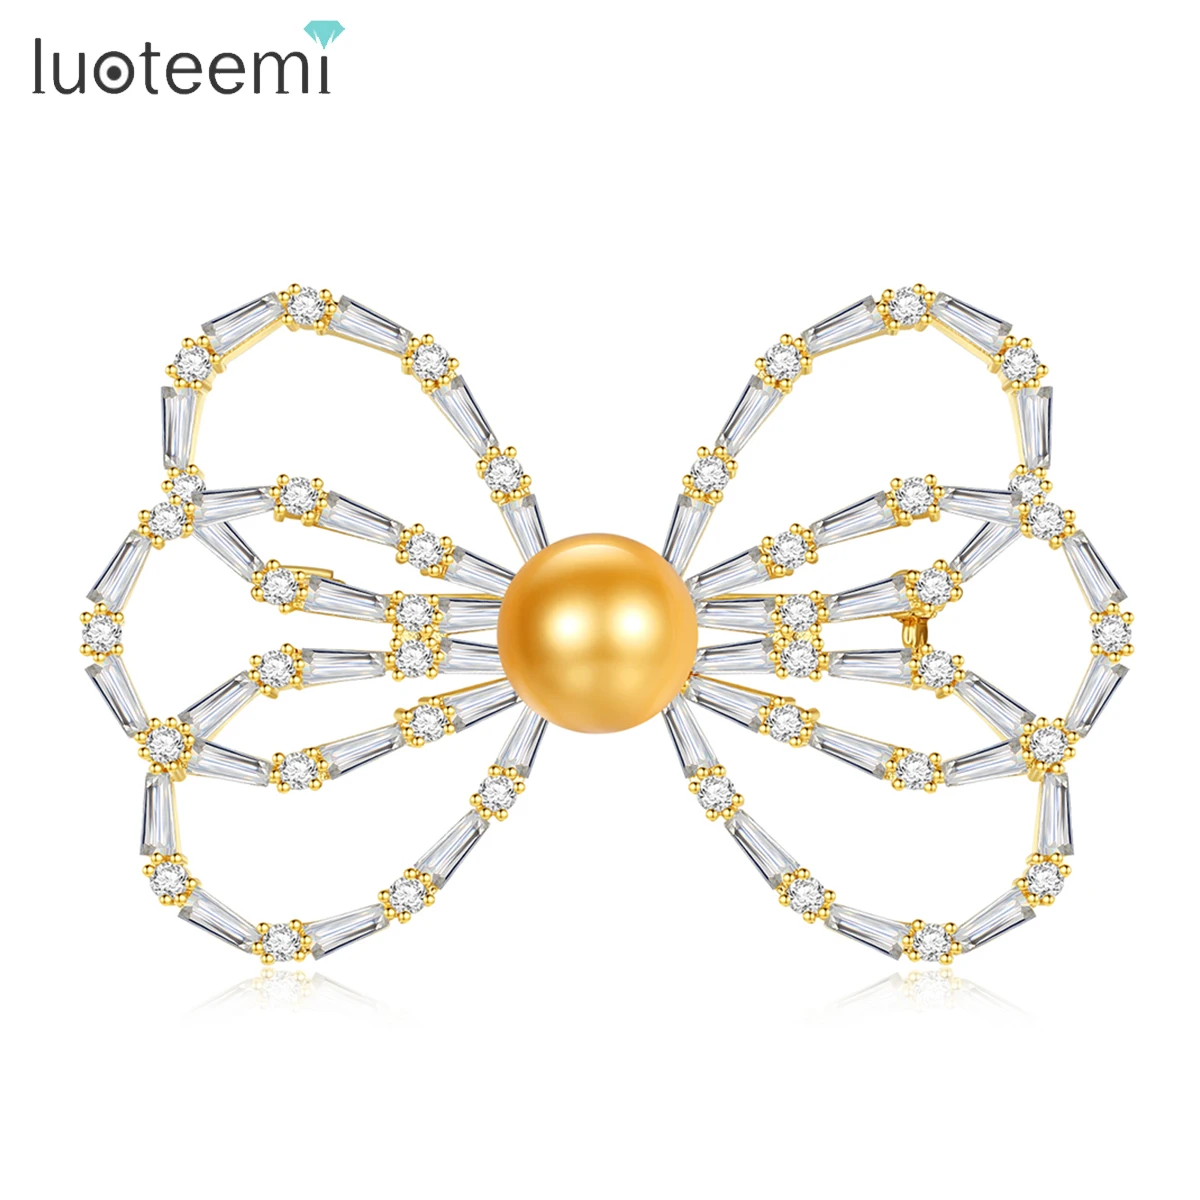 

LUOTEEMI Elegant Big Bow-knot Girl Brooch Imitation Pearls Cubic Zircon Fashion Jewelry for Women Wedding Party Anniversary Gift